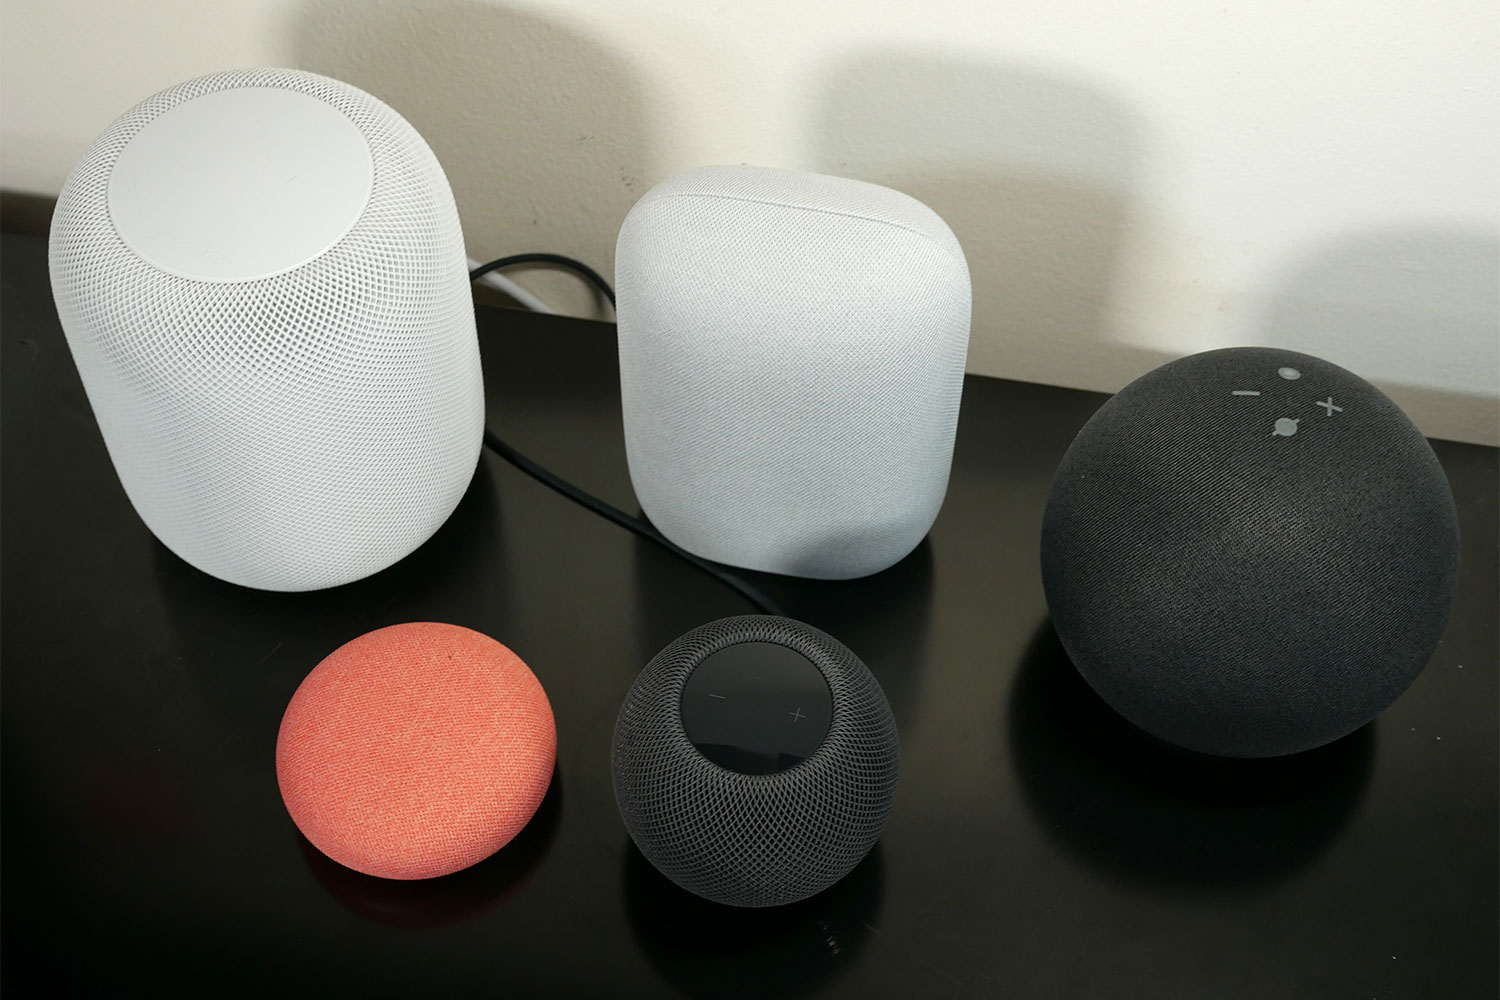 Editorial: After taking the premium tier, HomePod will expand in markets   and Google can't